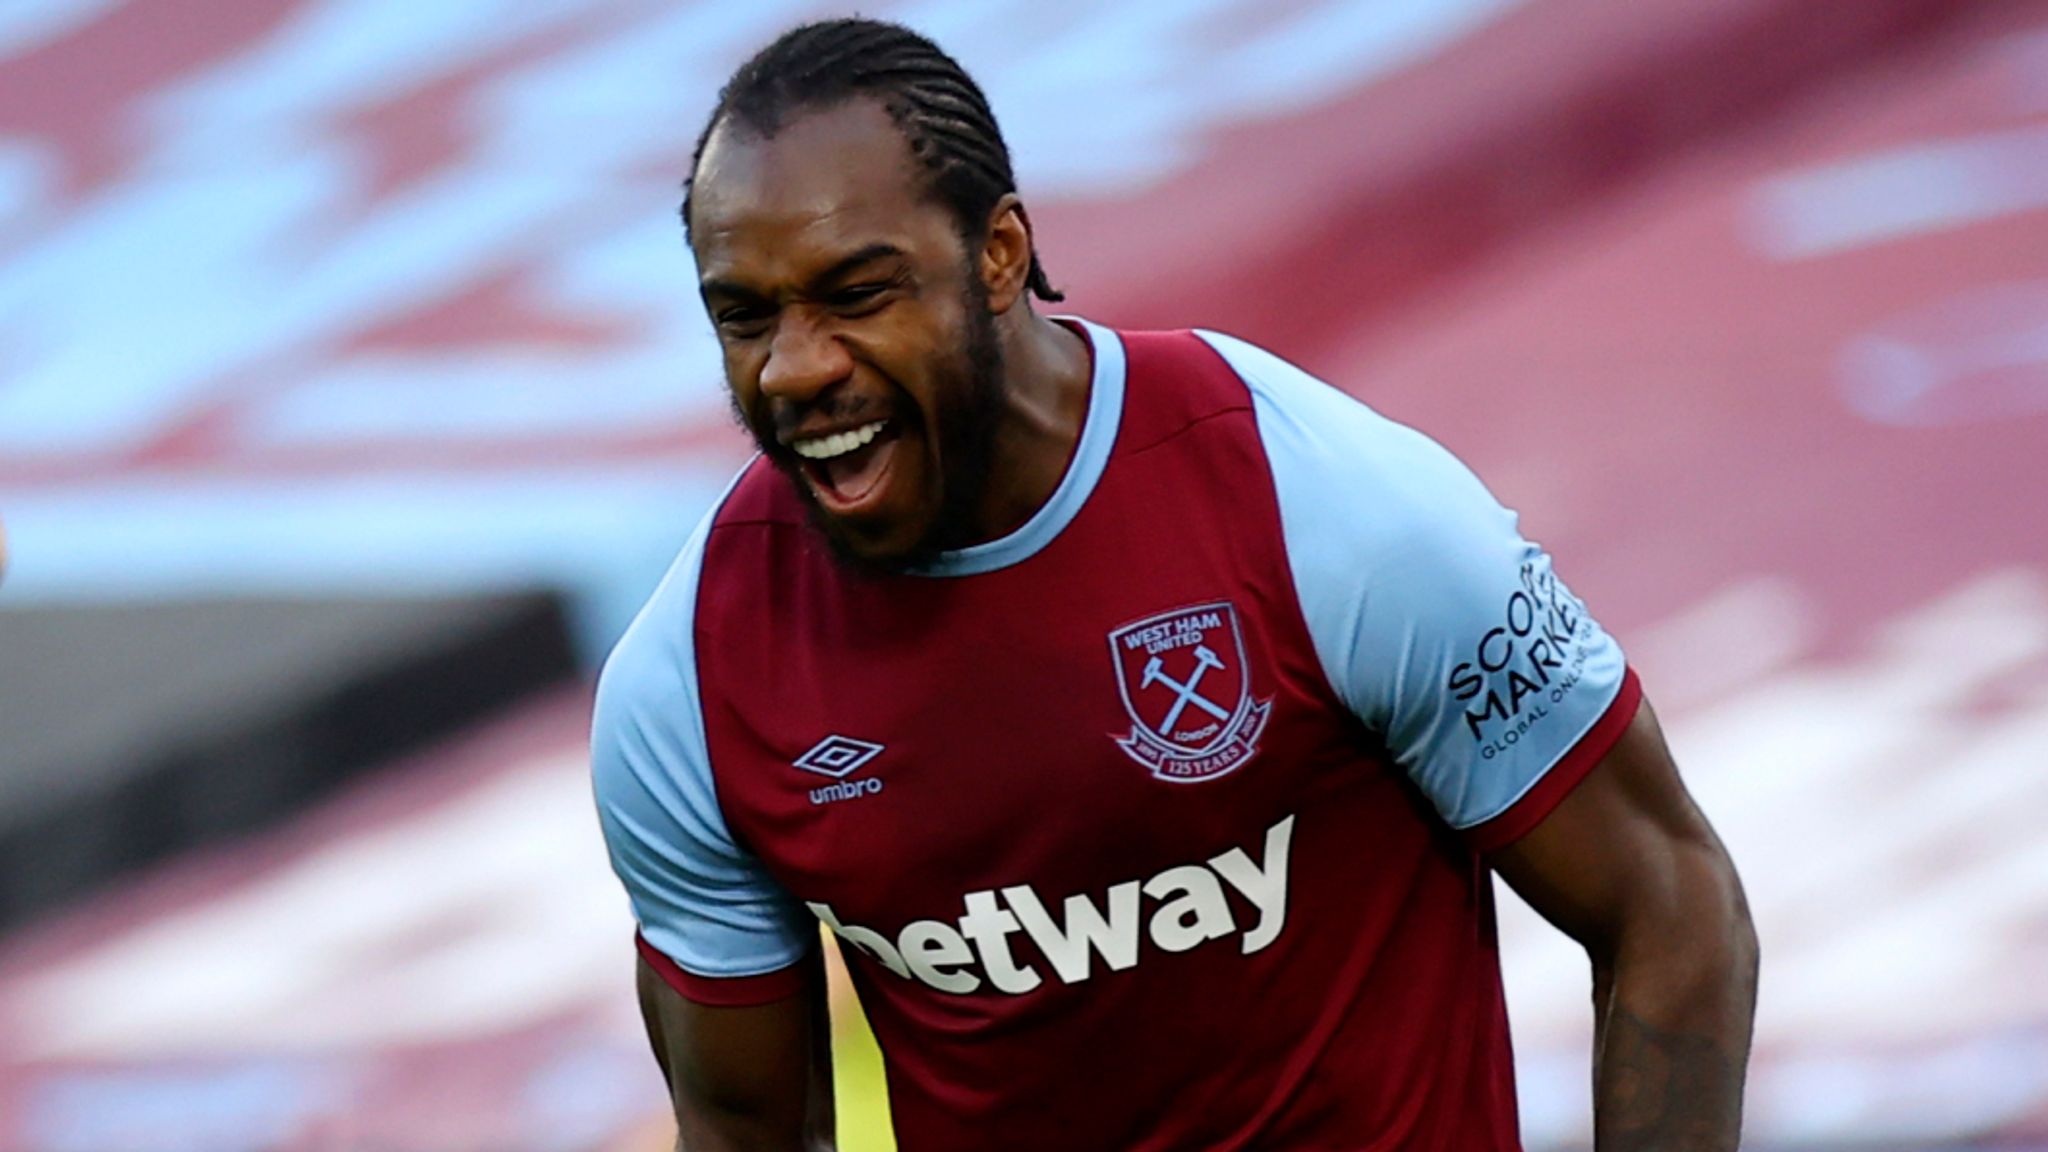 Antonio seeking first goal against Leeds at 10th attempt